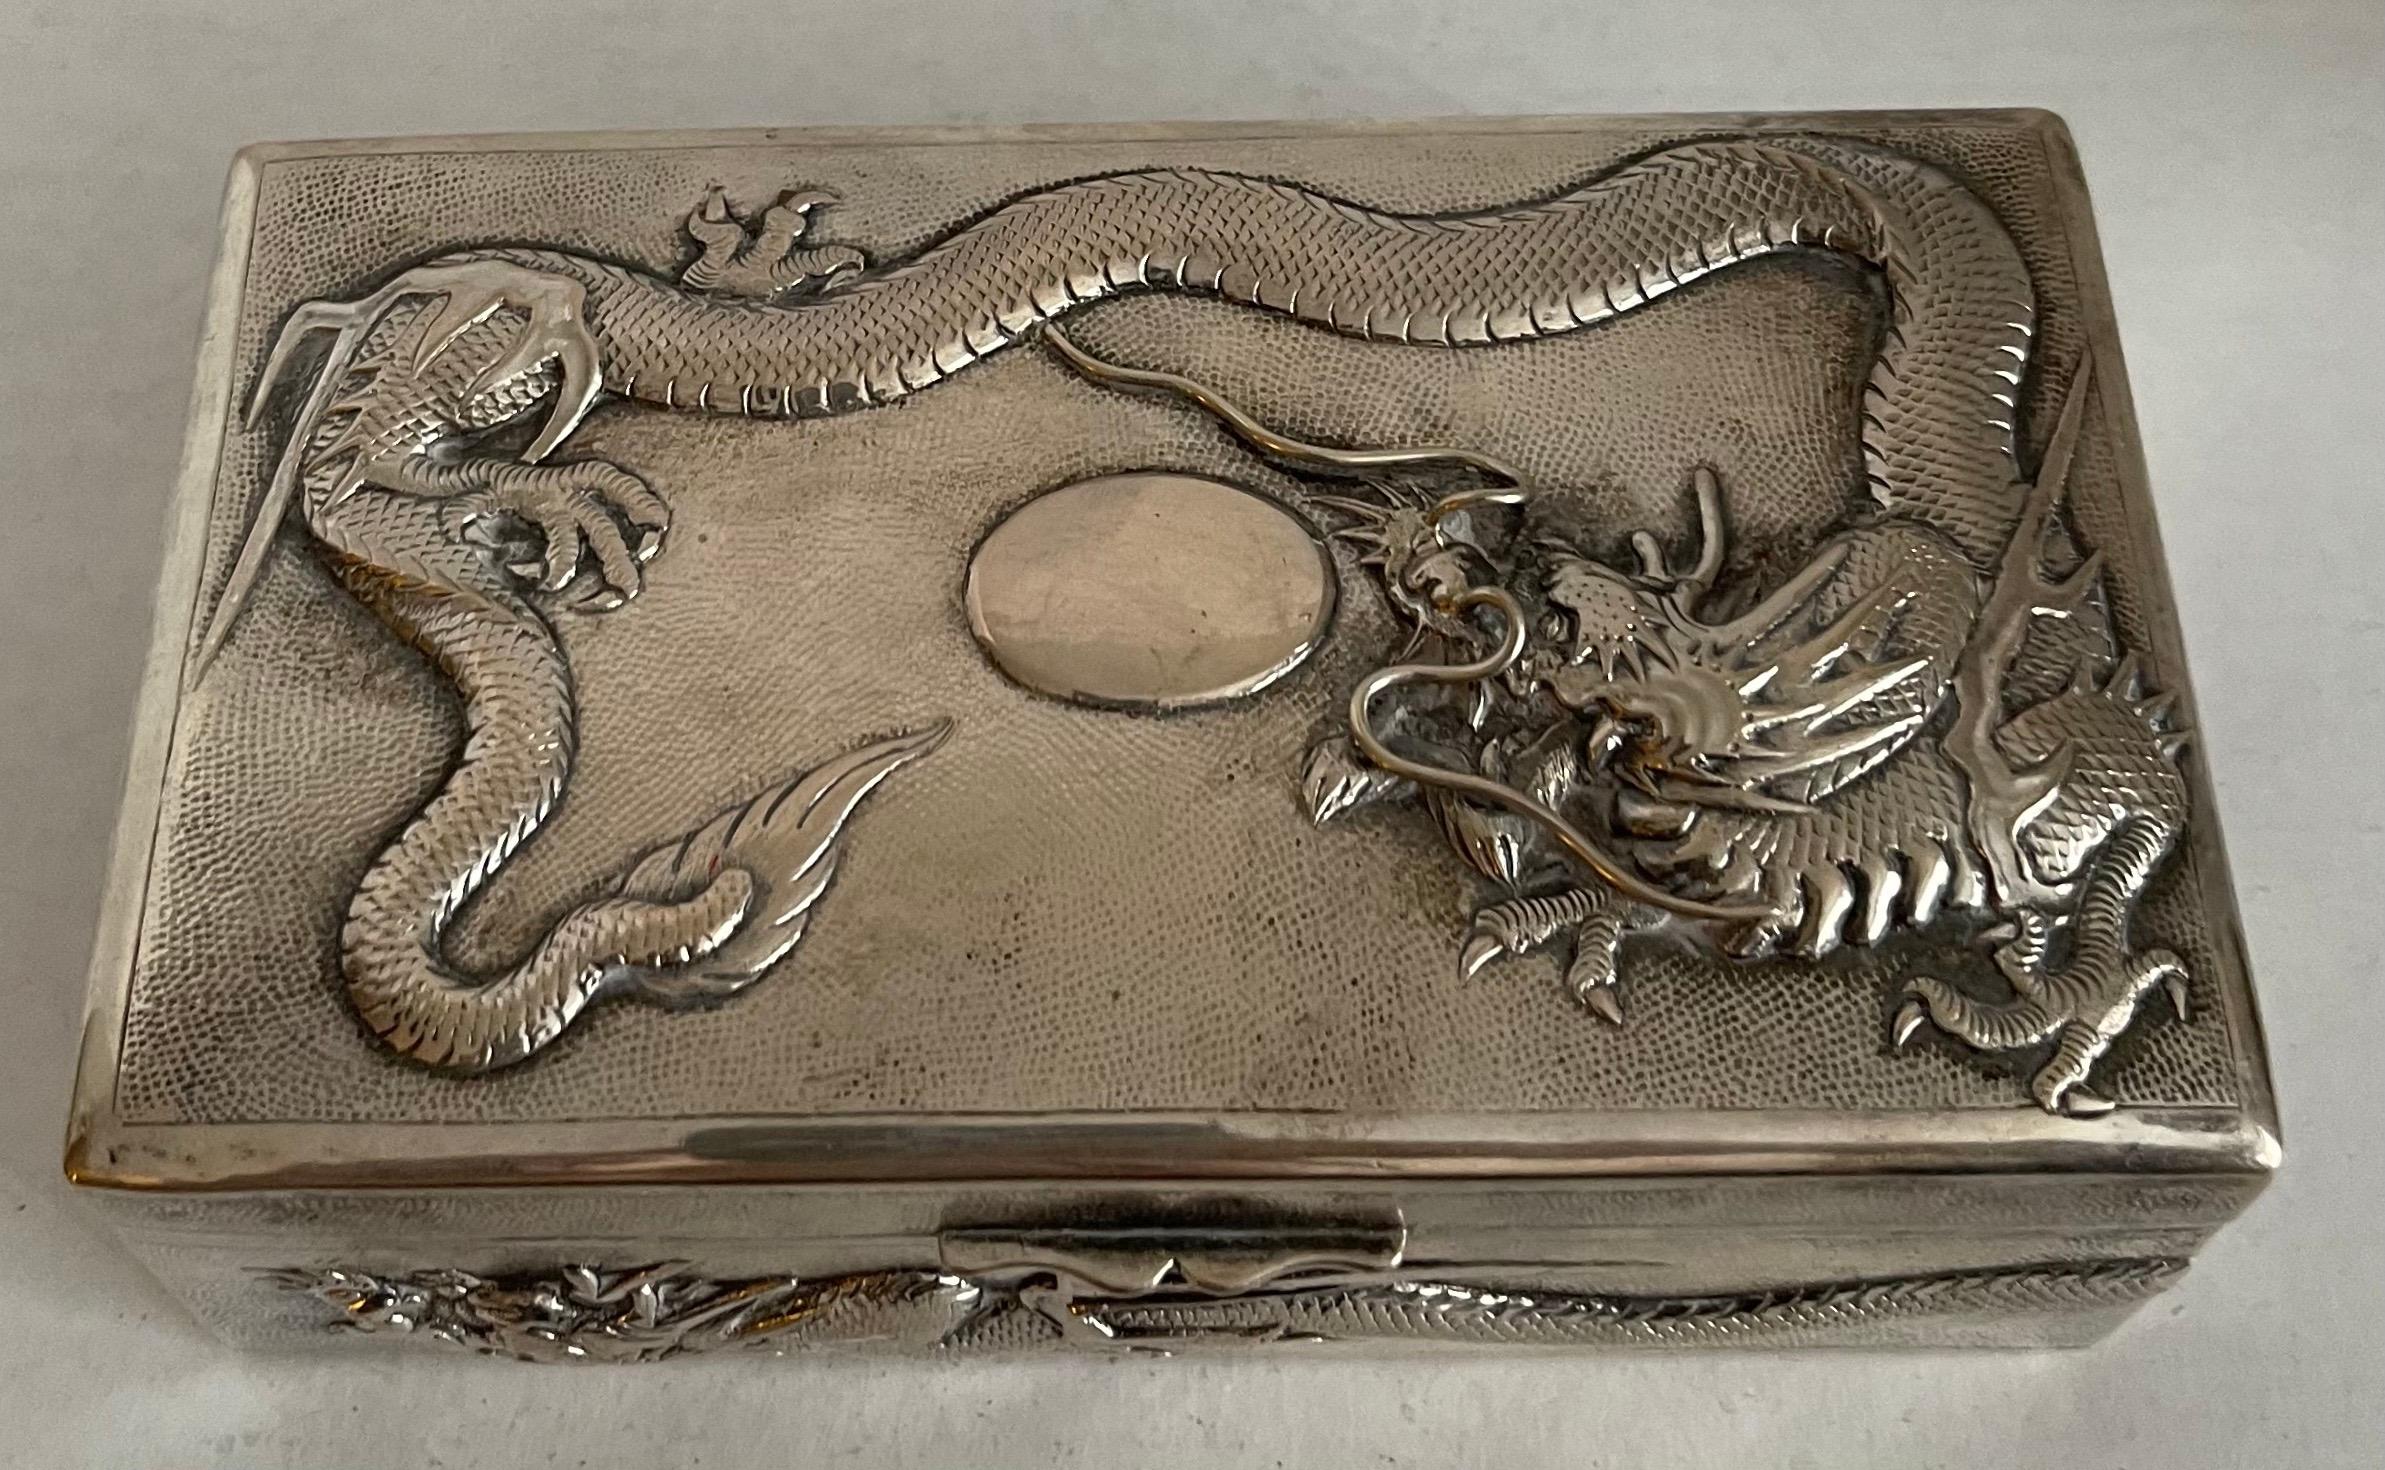 Late 19th century, circa 1890 Chinese export silver rectangular box. Hand engraved repoussè dragons. Wood lined. Makers mark on the underside.